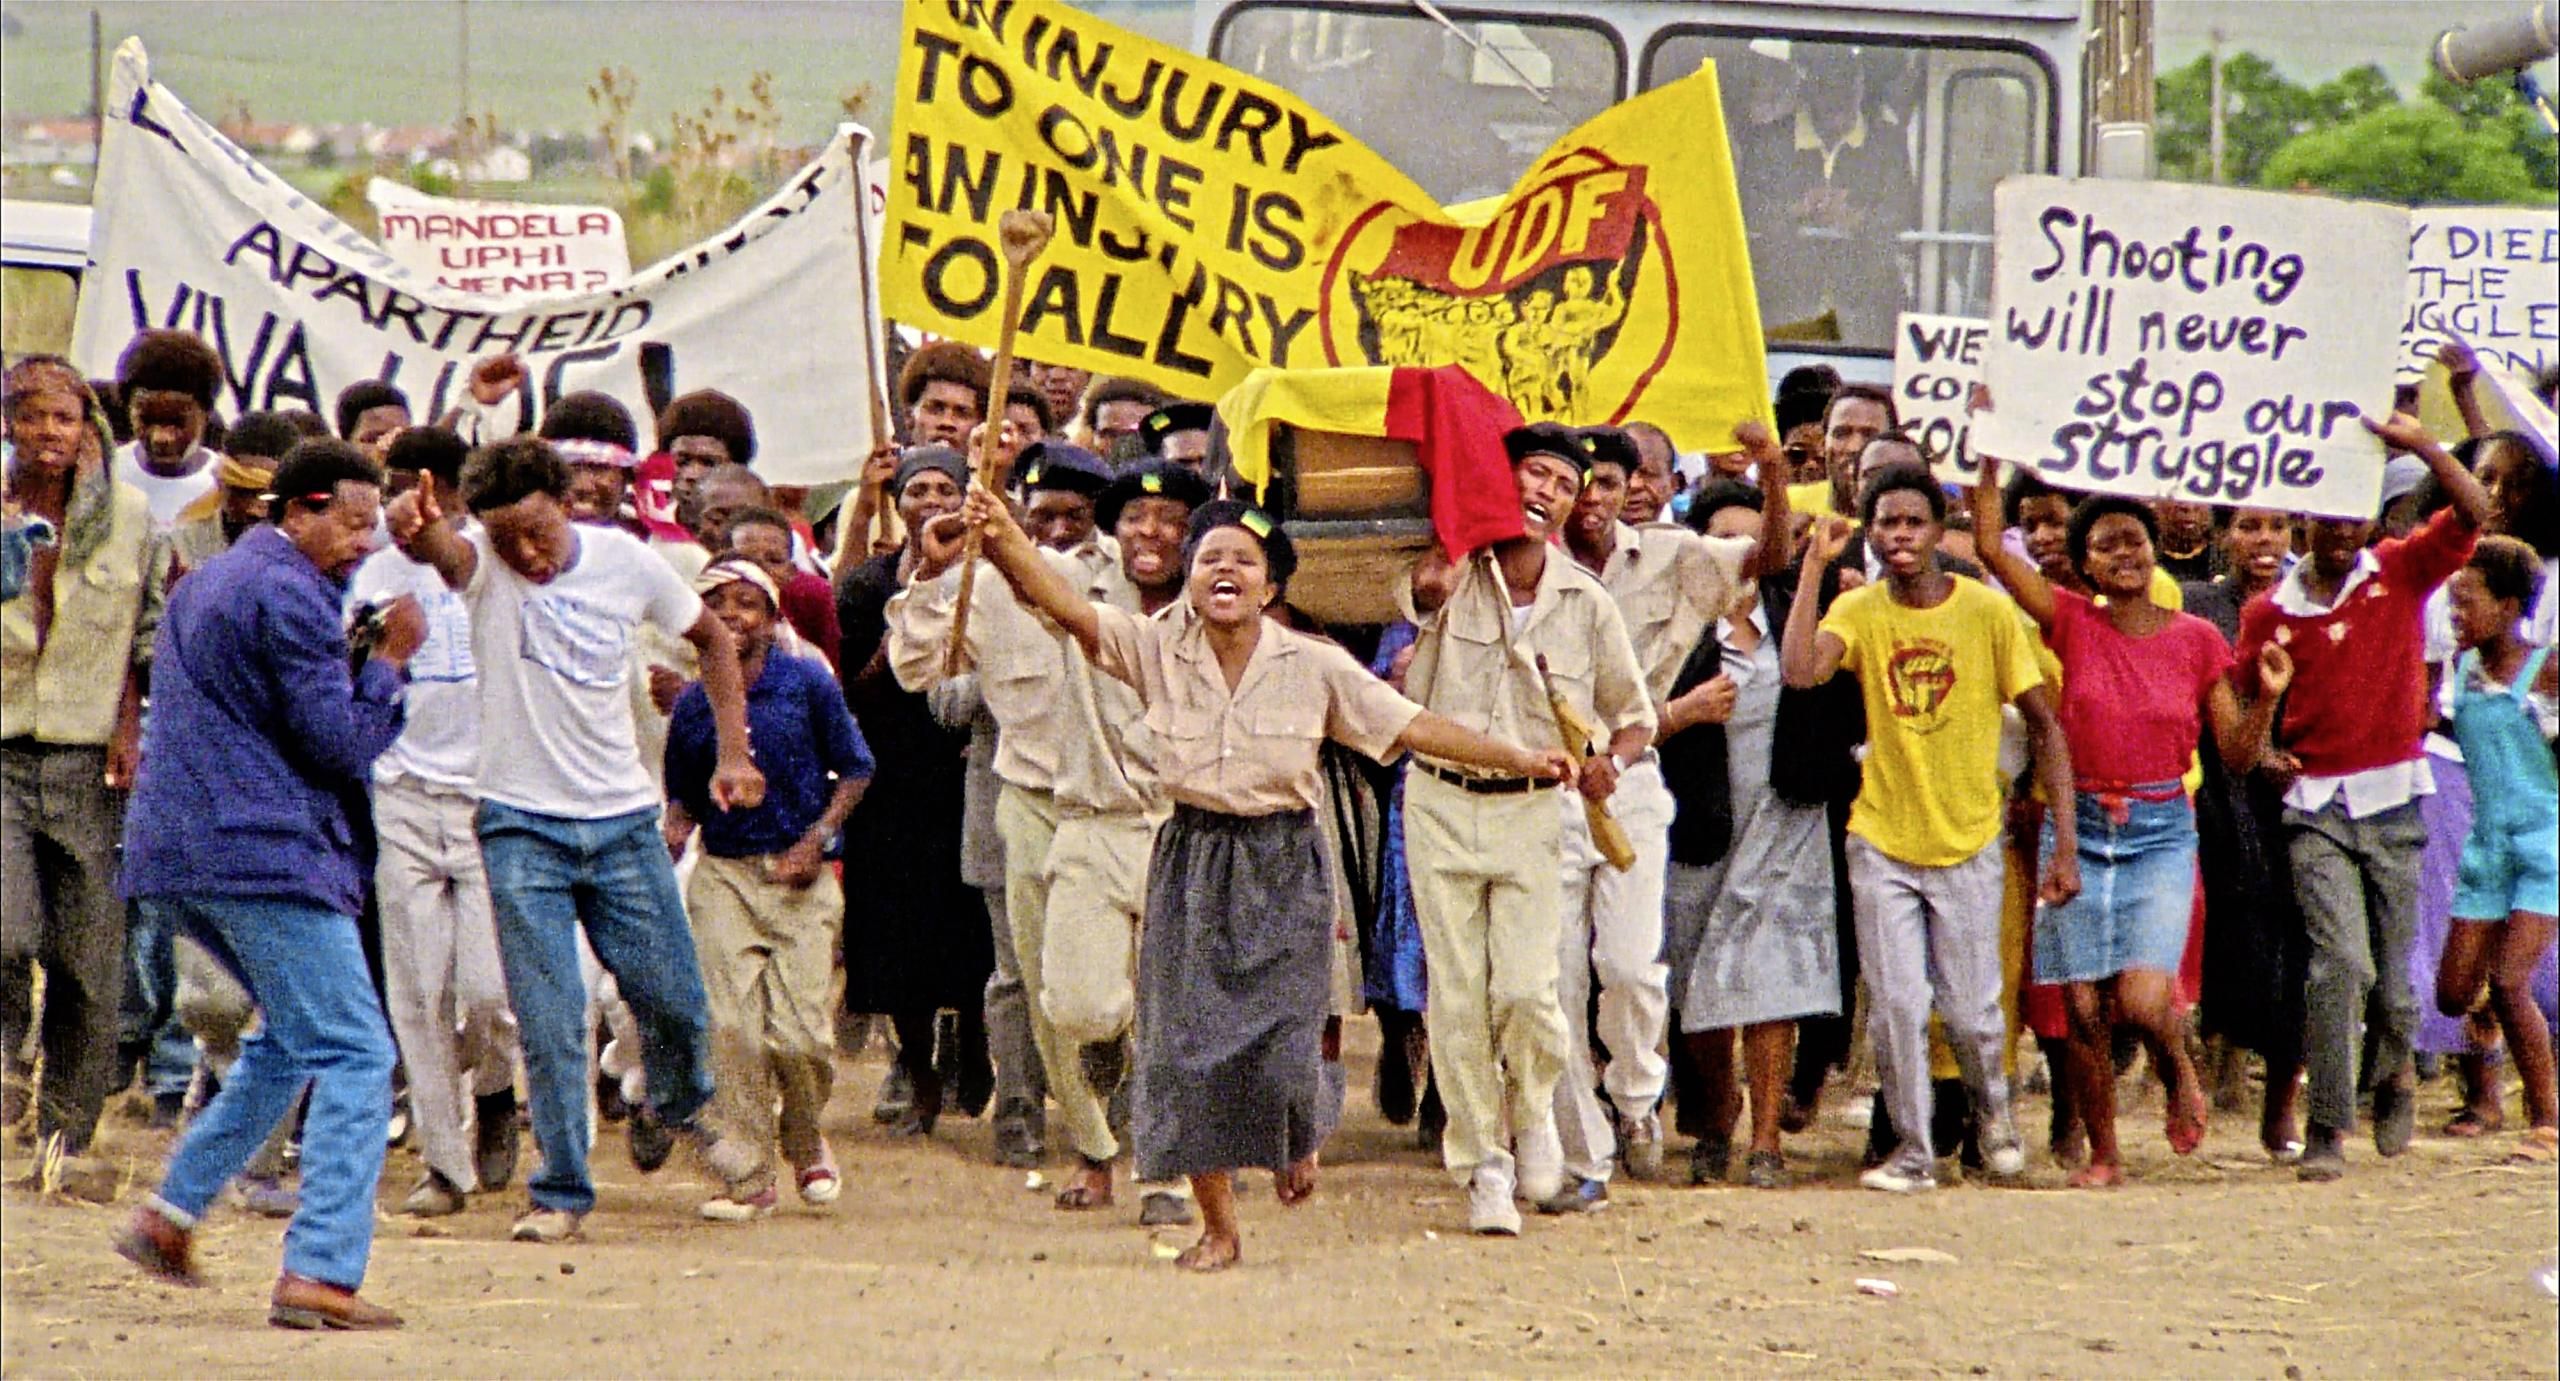 Still in color: A group of black people protesting apartheid in South Africa